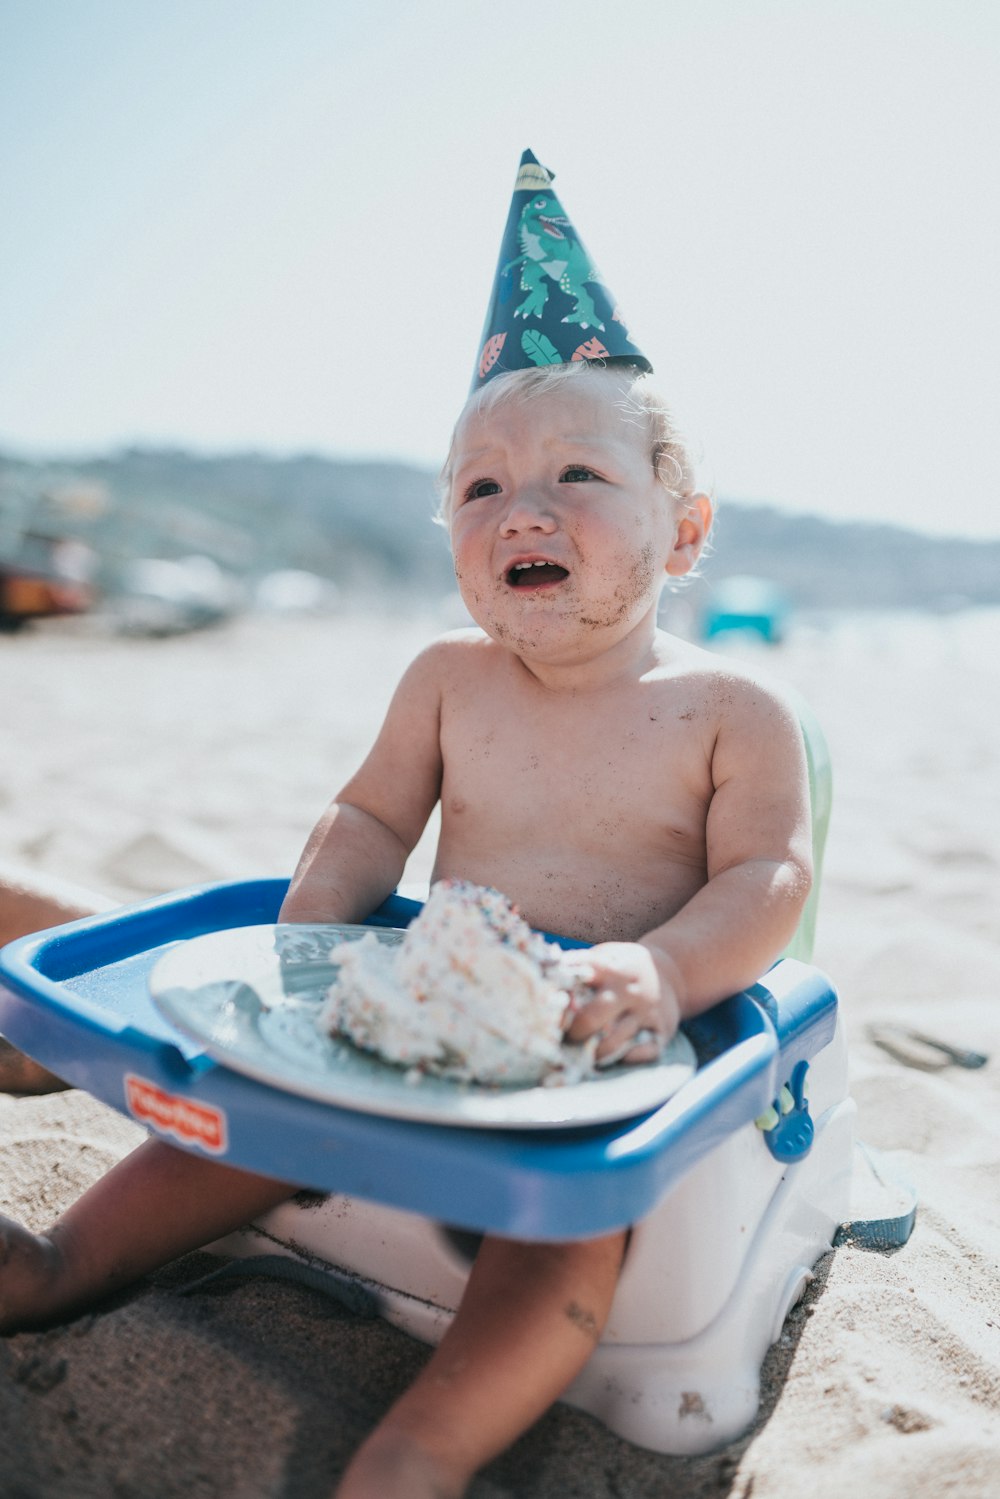 topless baby sitting on blue plastic bath tub on beach during daytime